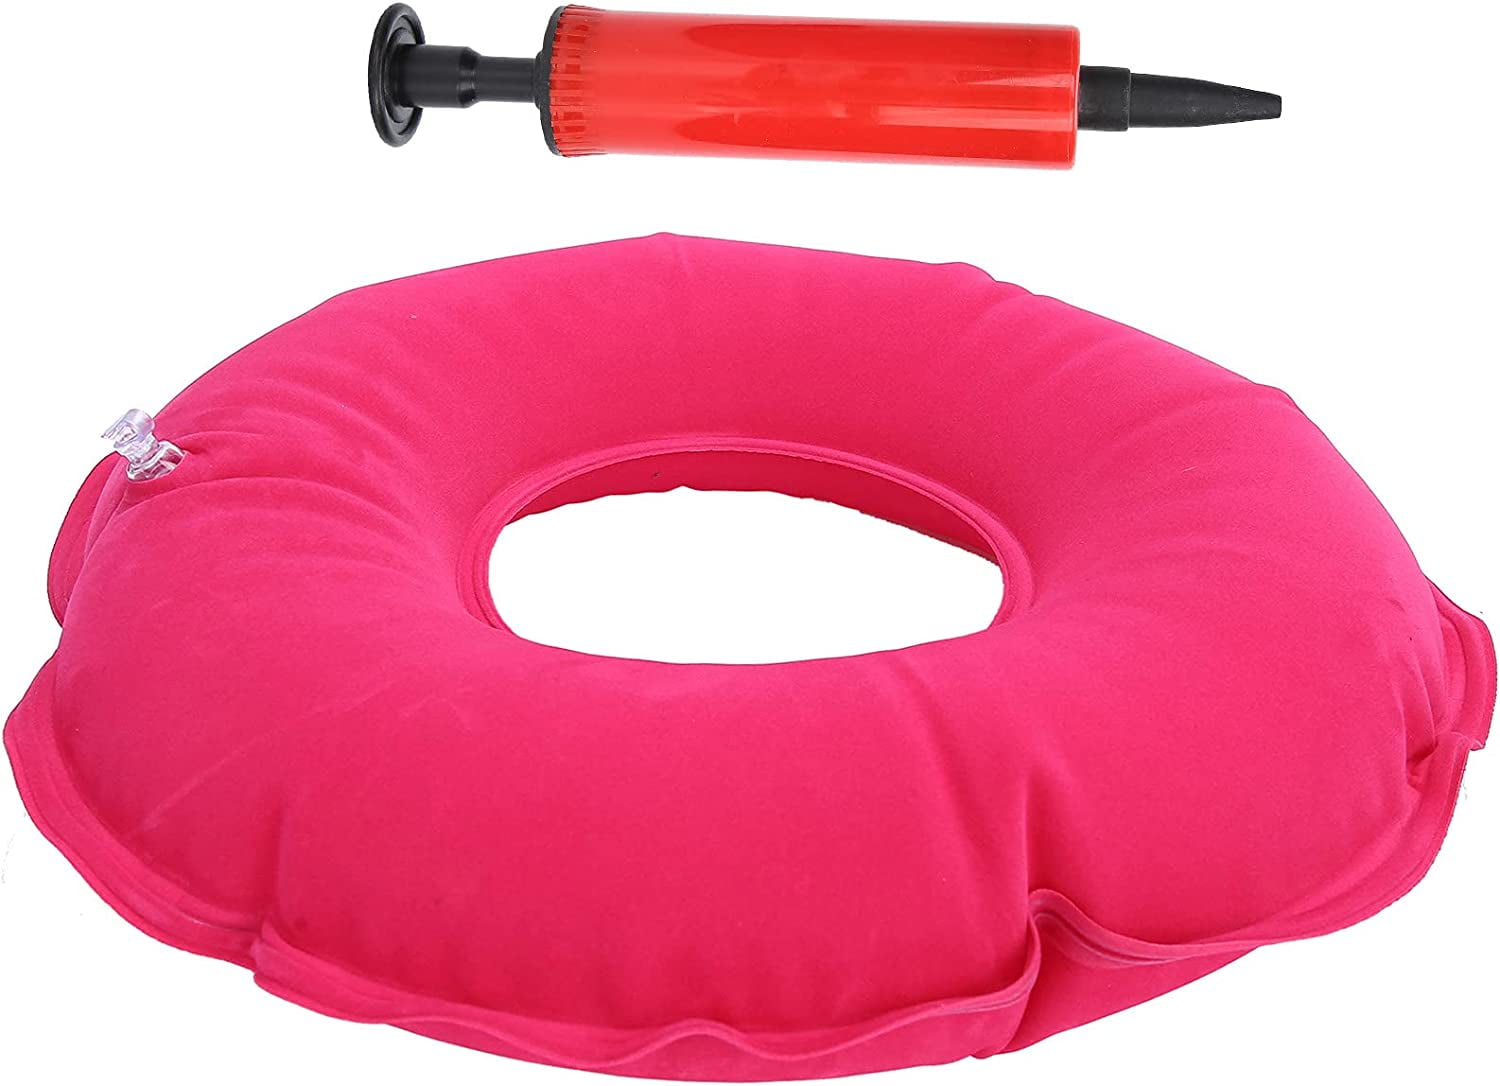 Waffle Cushion Pressure Relief for Pressure Sores, Tailbone Pain Relief,Inflatable Seat Air Cushion for Chair to RELIFE Back Pain, Size: 17.7×15.7×1.9